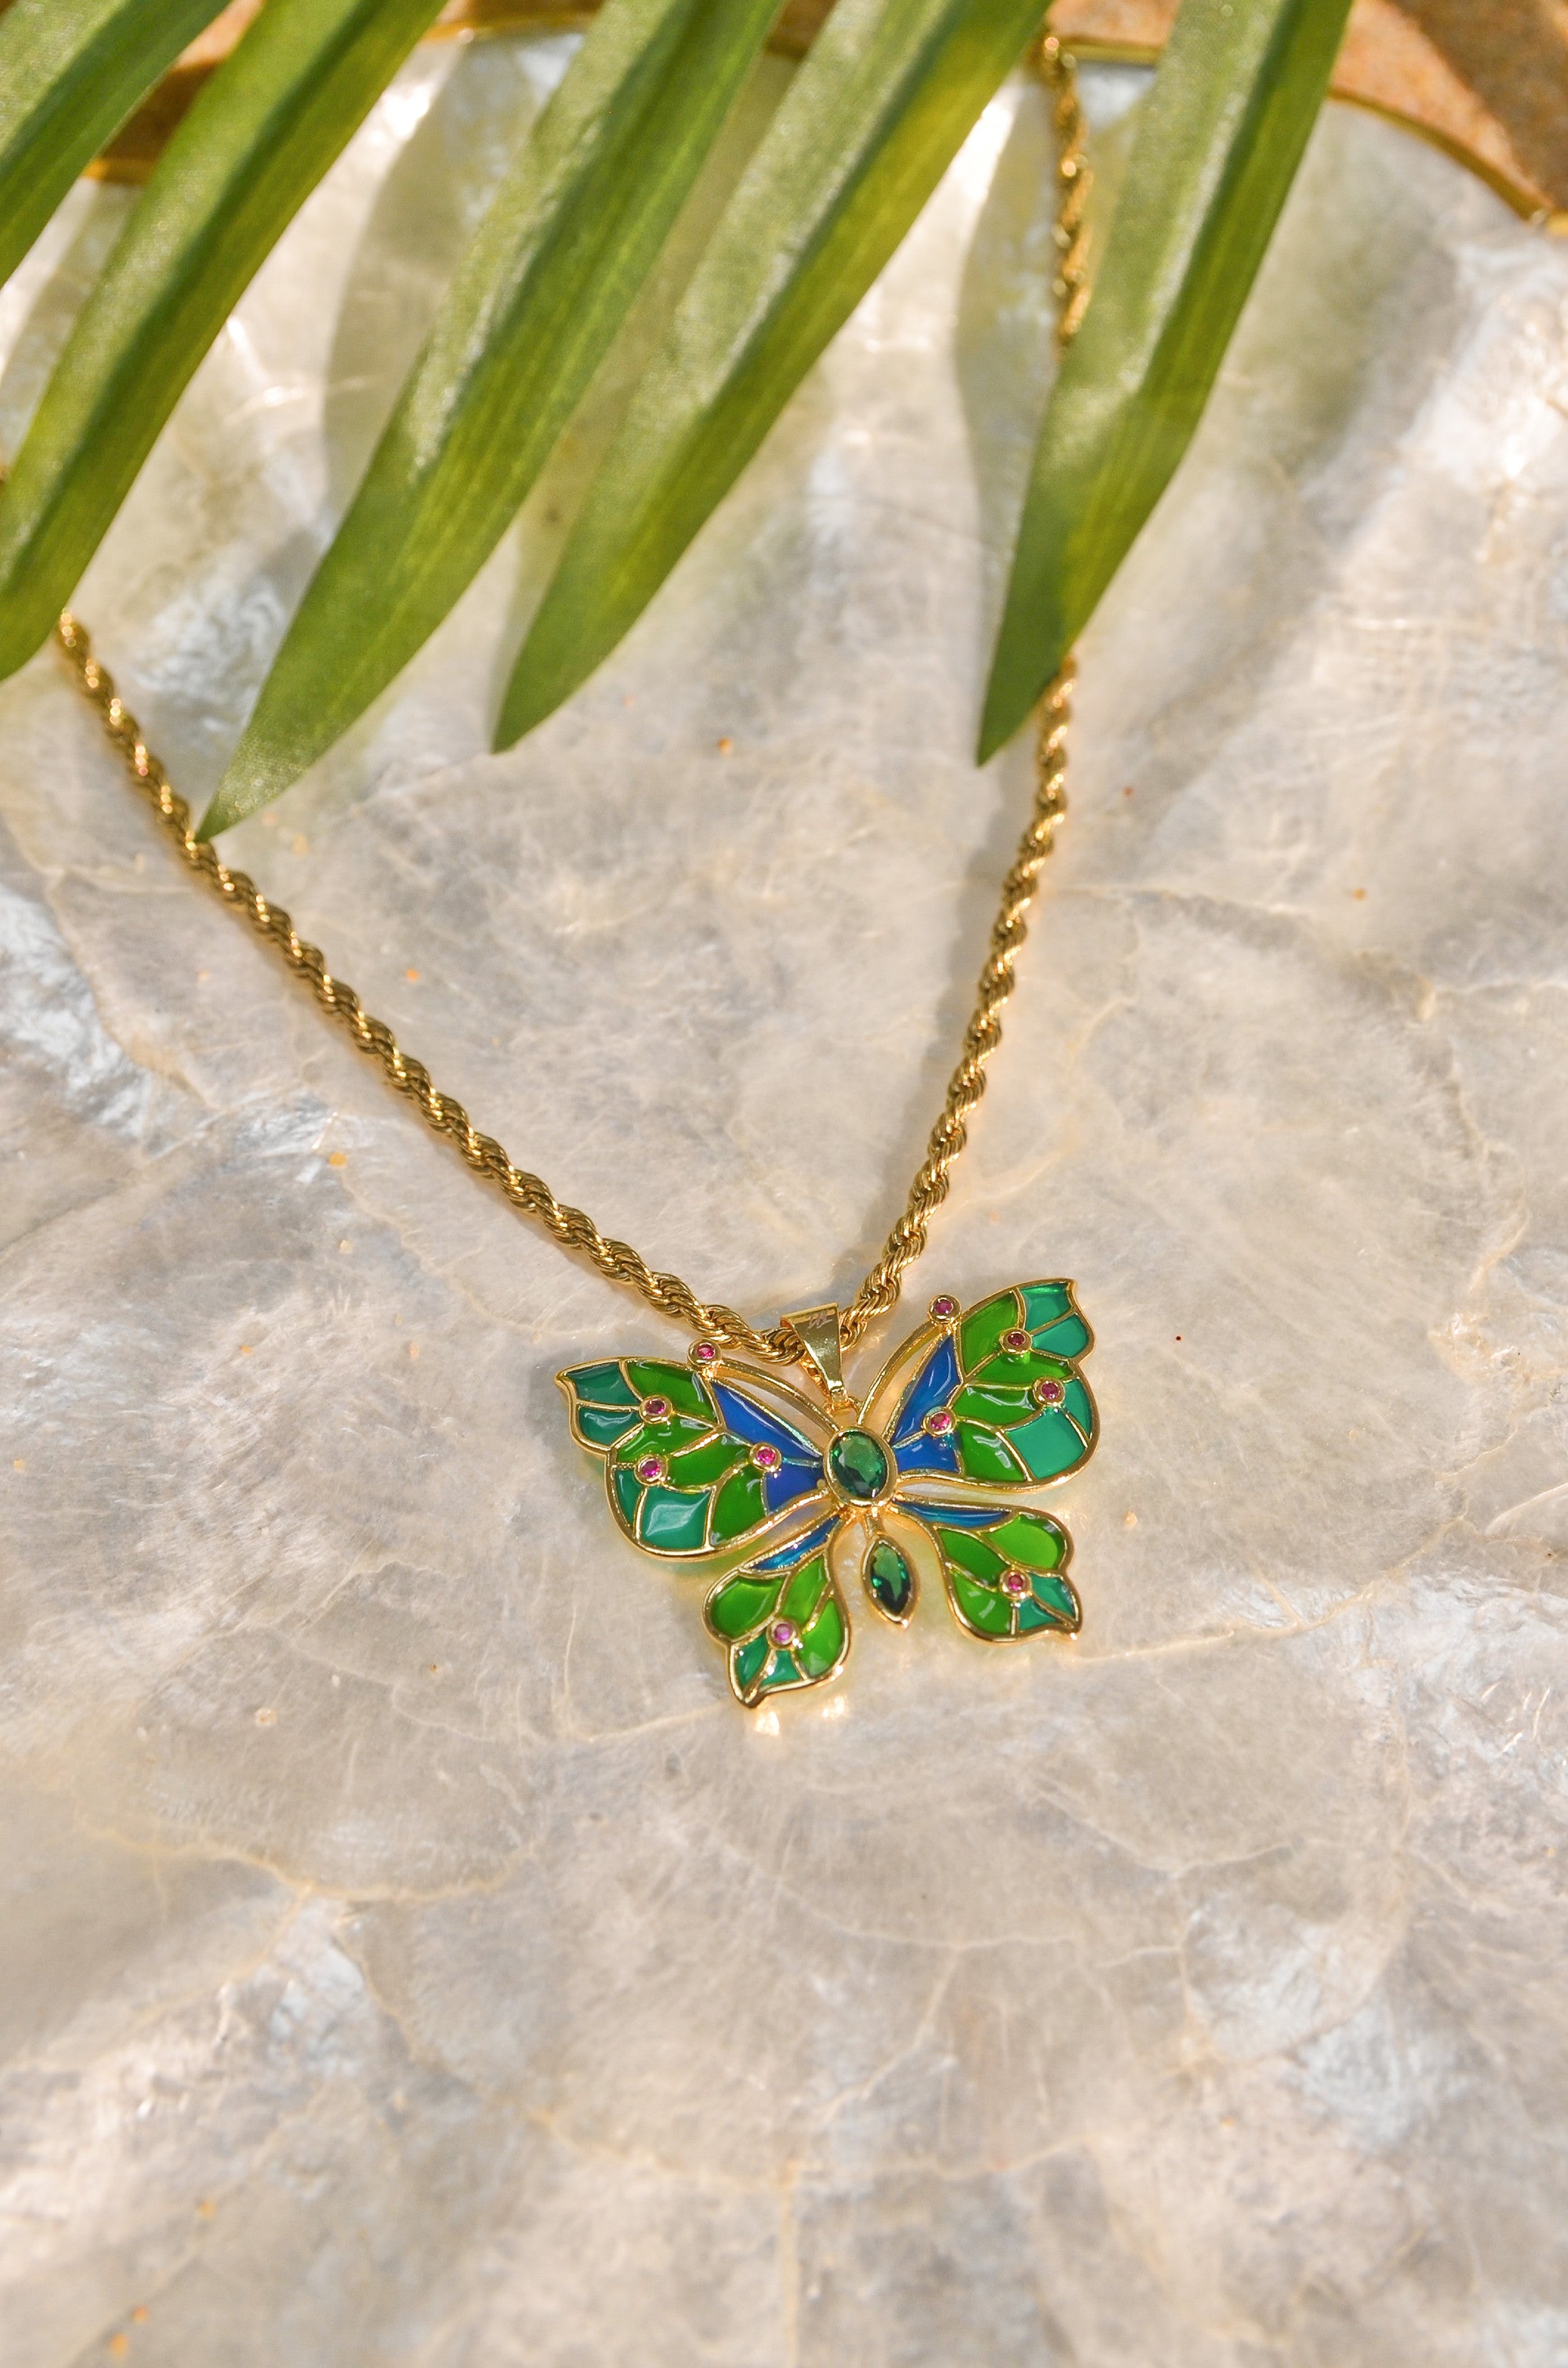 Old and Good Antique Jewelry Vintage Avon Pink Leaf Butterfly Necklace 1984  N283 - Shop Damn Good Vintage Necklaces - Pinkoi